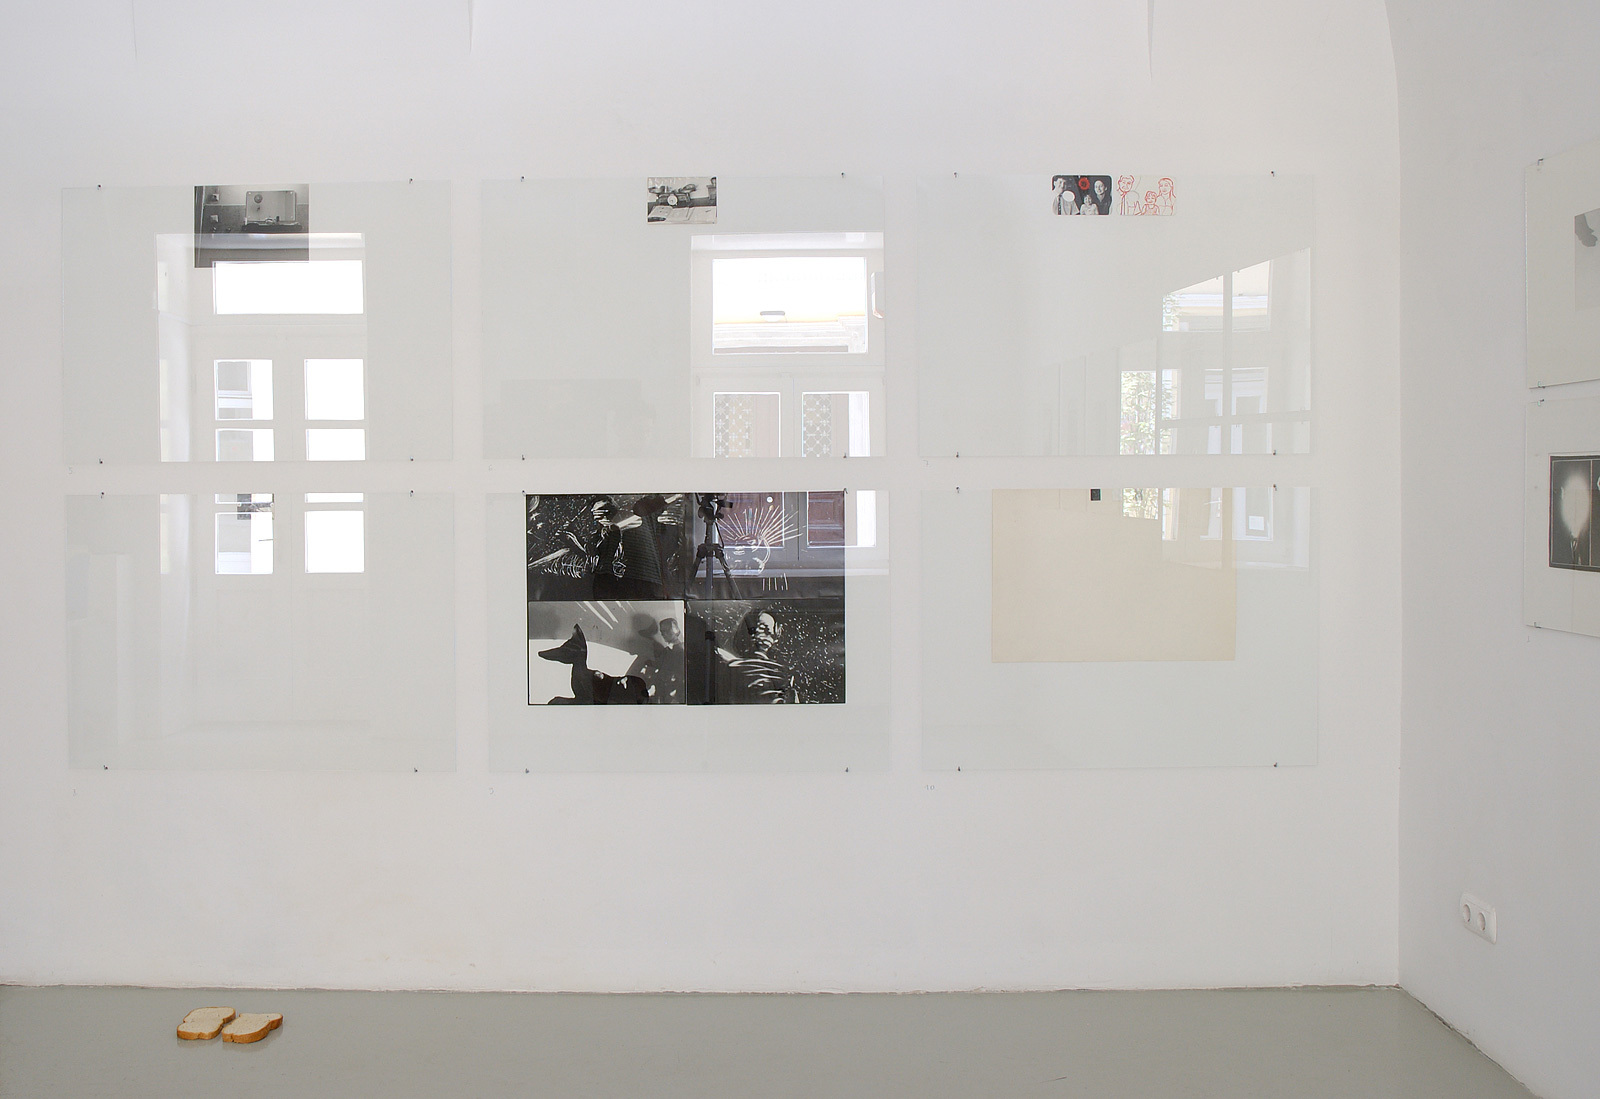 Installation view with works of Miklós ERDÉLY and the INDIGO GROUP, Kisterem, 2008